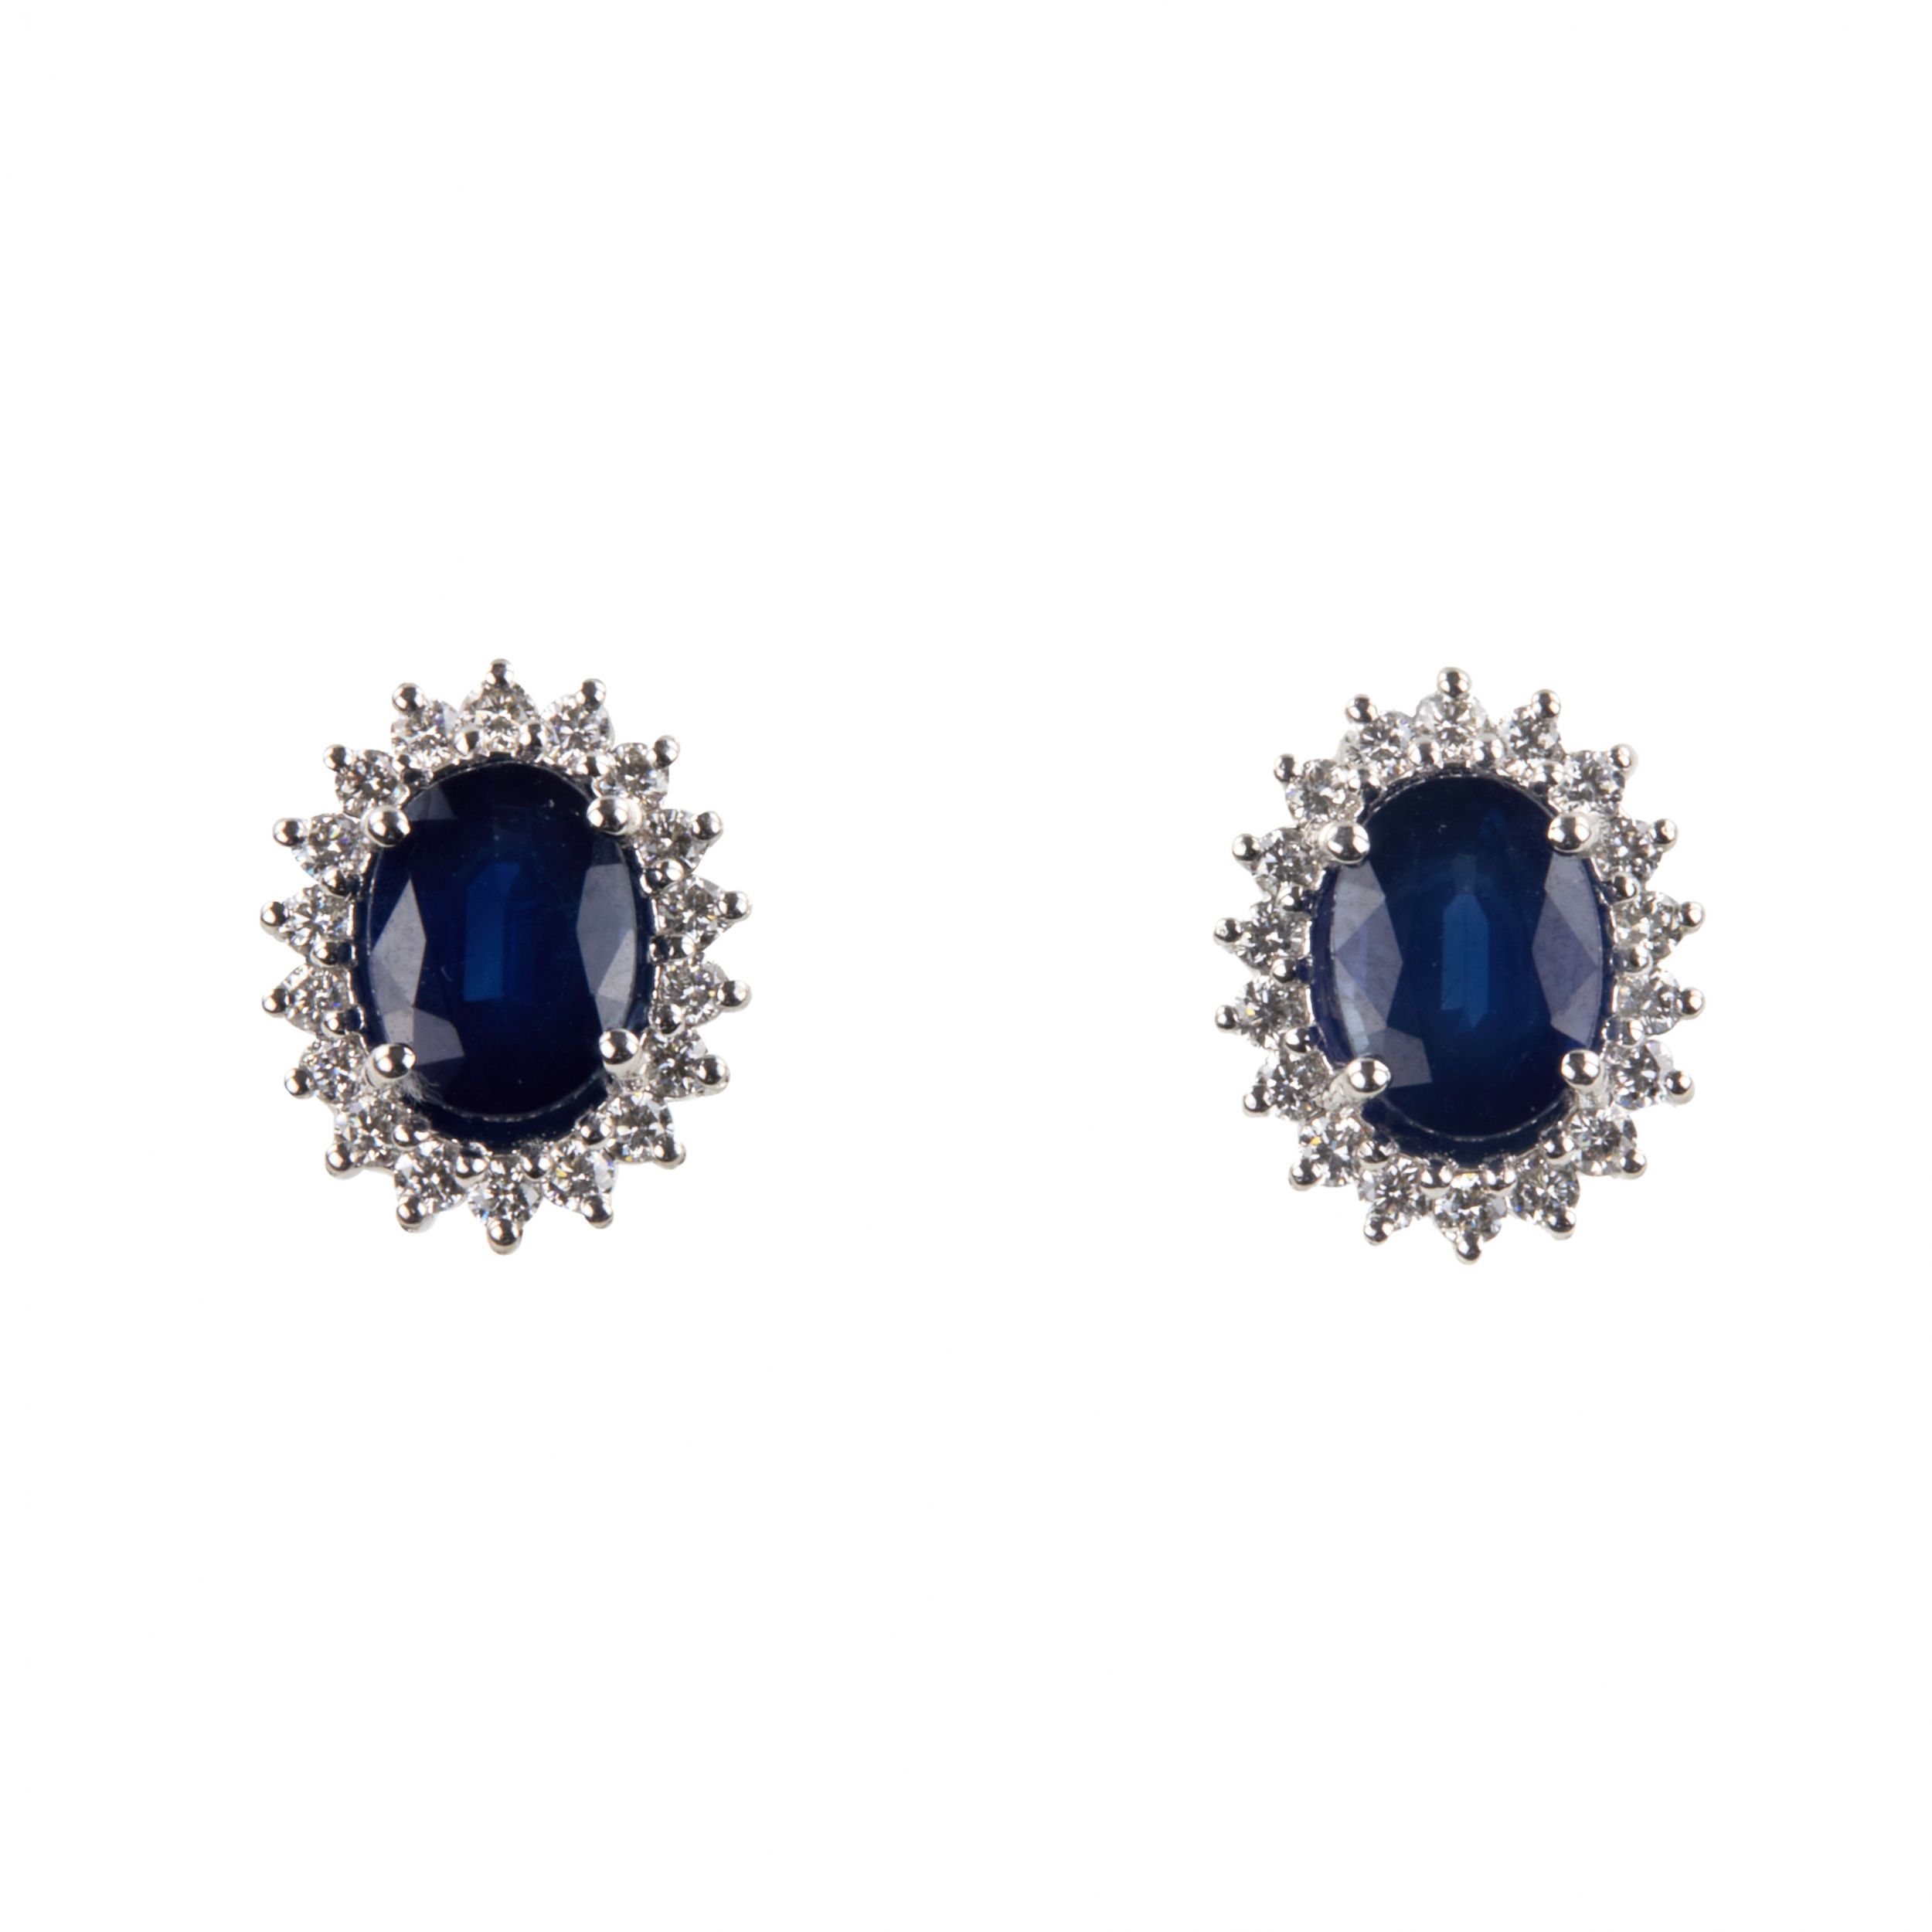 White-gold-earrings-with-blue-sapphires-and-diamonds-